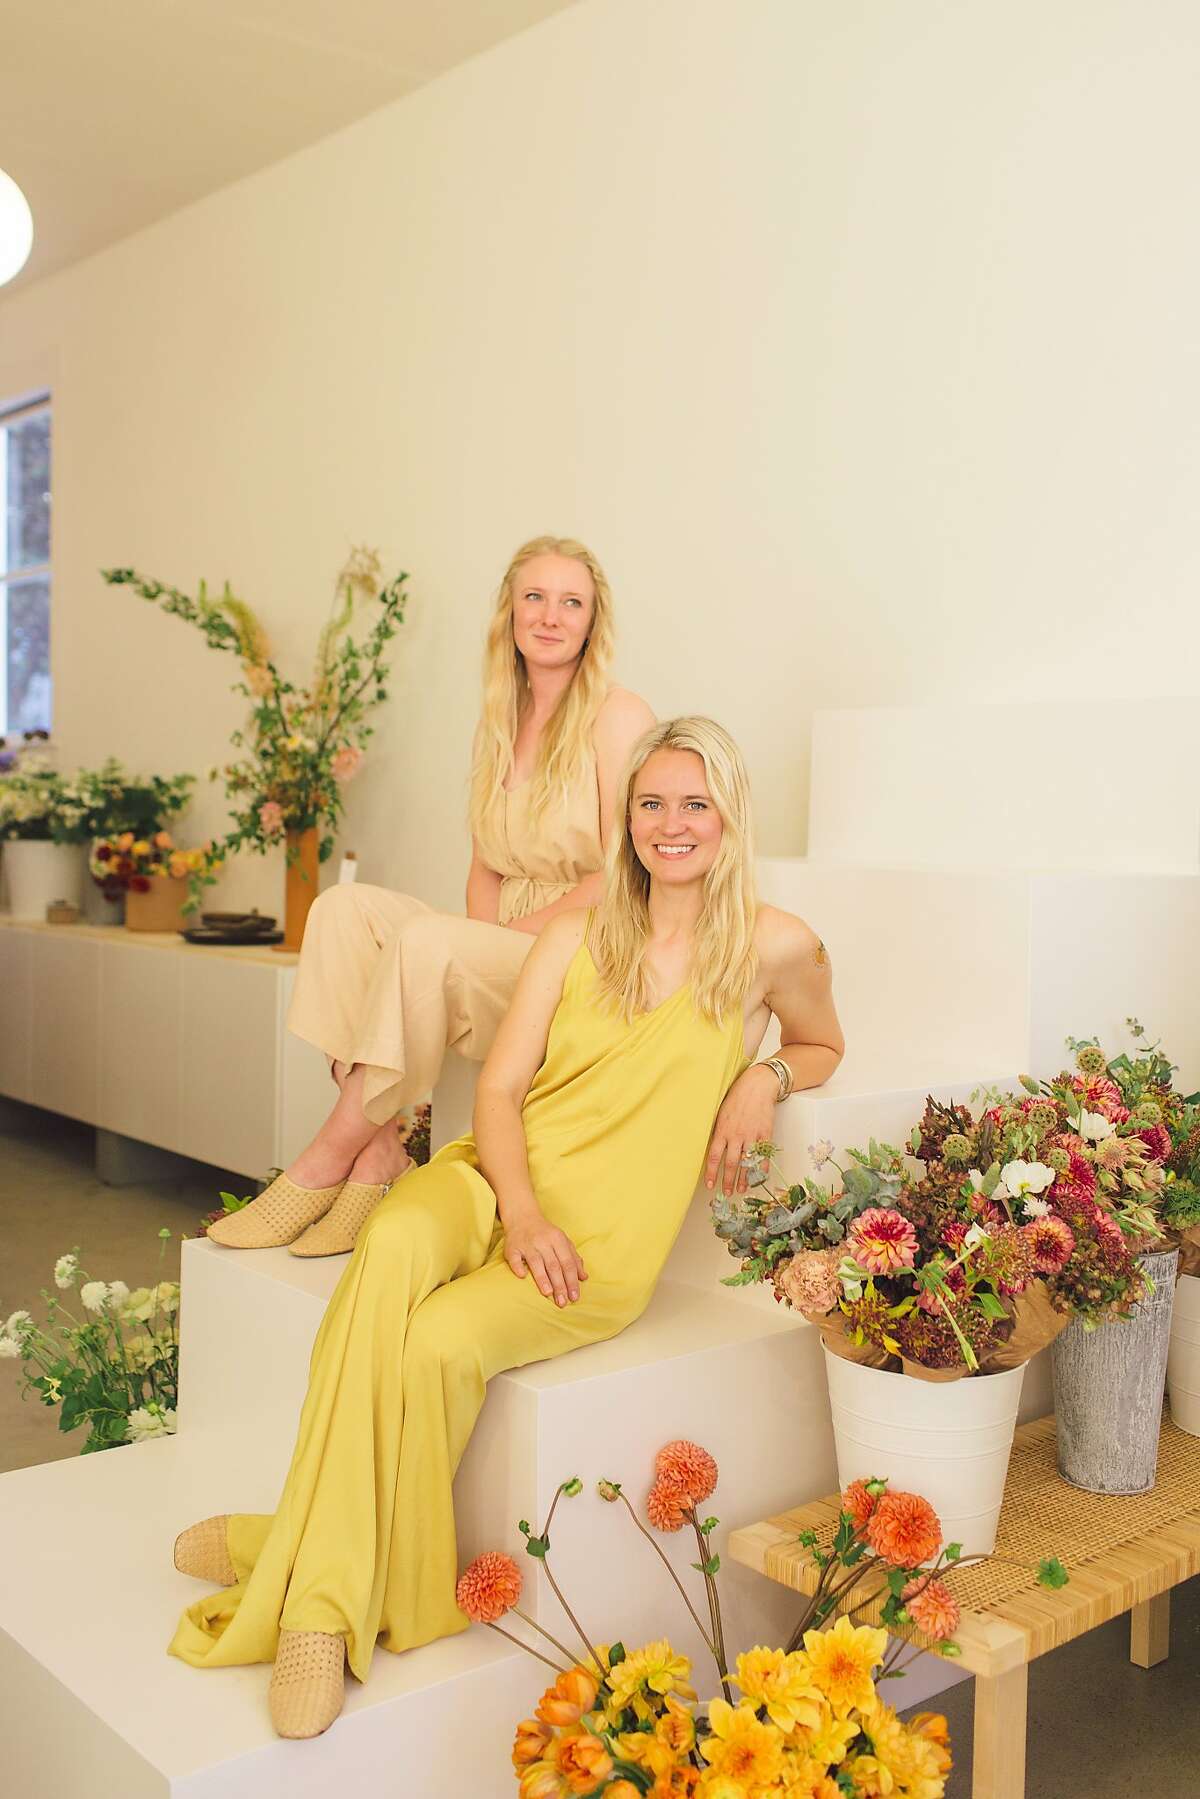 Gena Winter (left) and Aubriana MacNiven are the co-owners of Marigold, a flora shop in the Mission District that has become a popular events space as well.